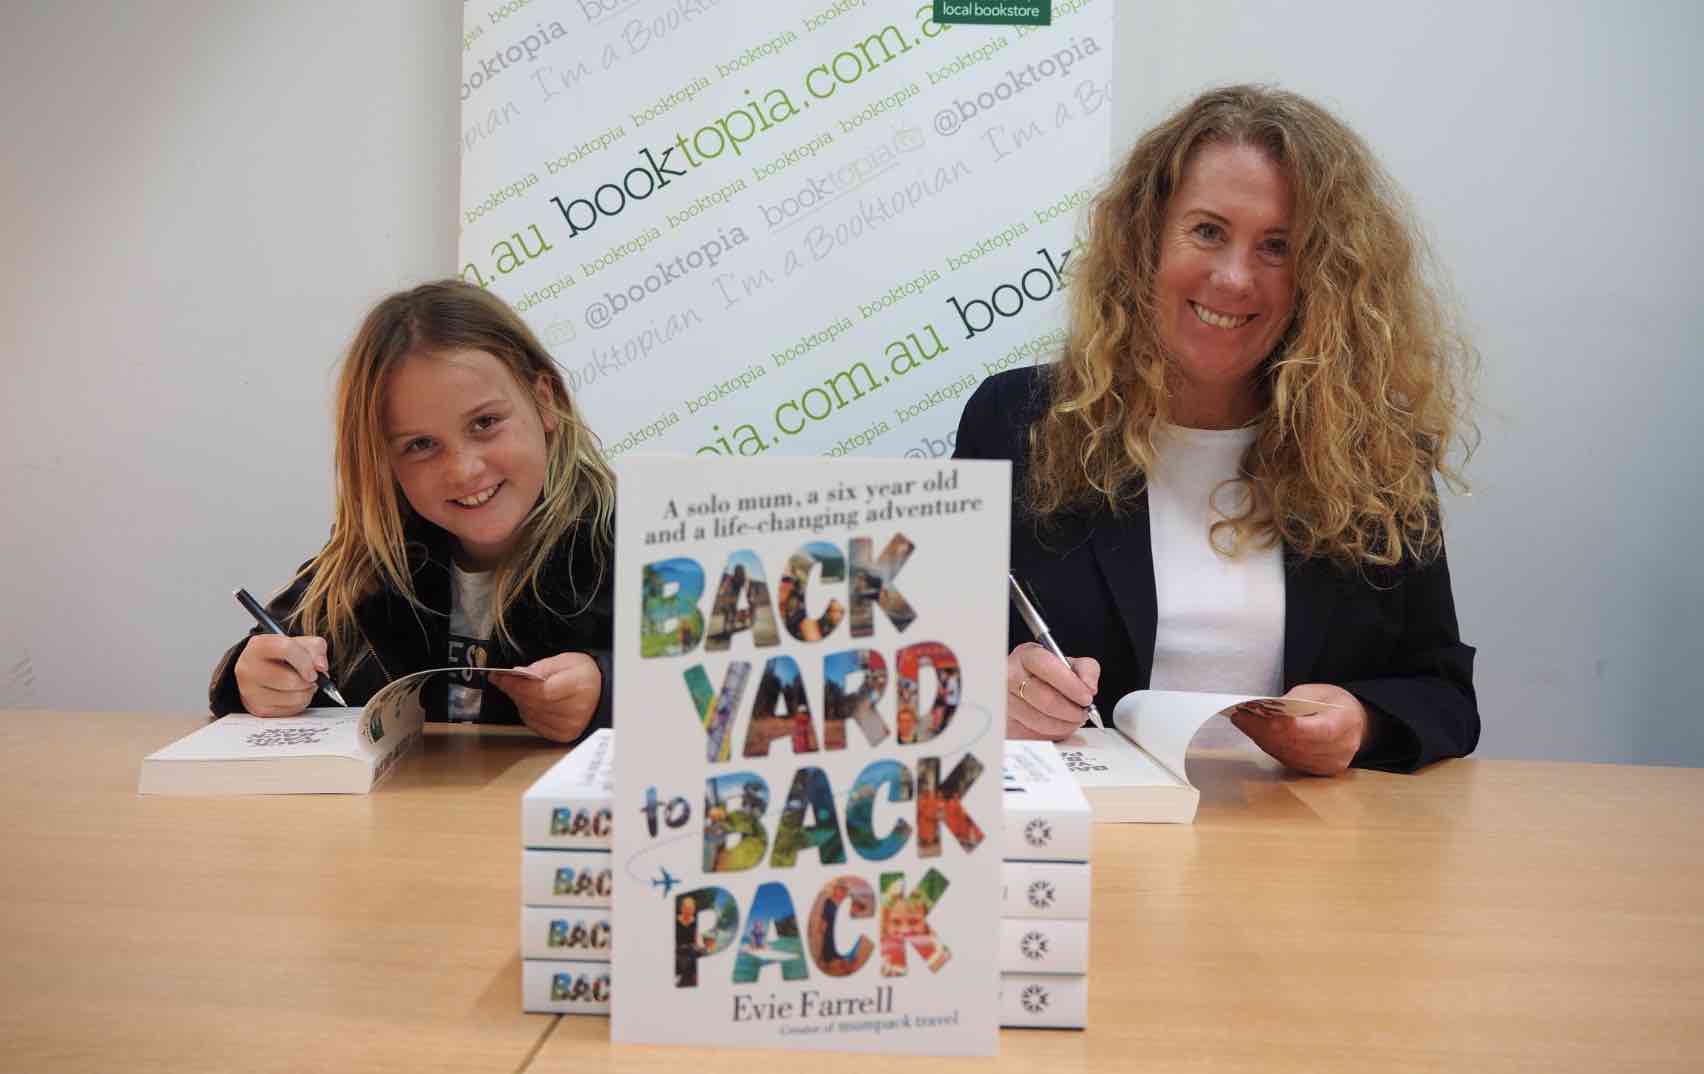 BOOK EXCERPT: Backyard to Backpack: A solo mum, a six year old and a life-changing adventure